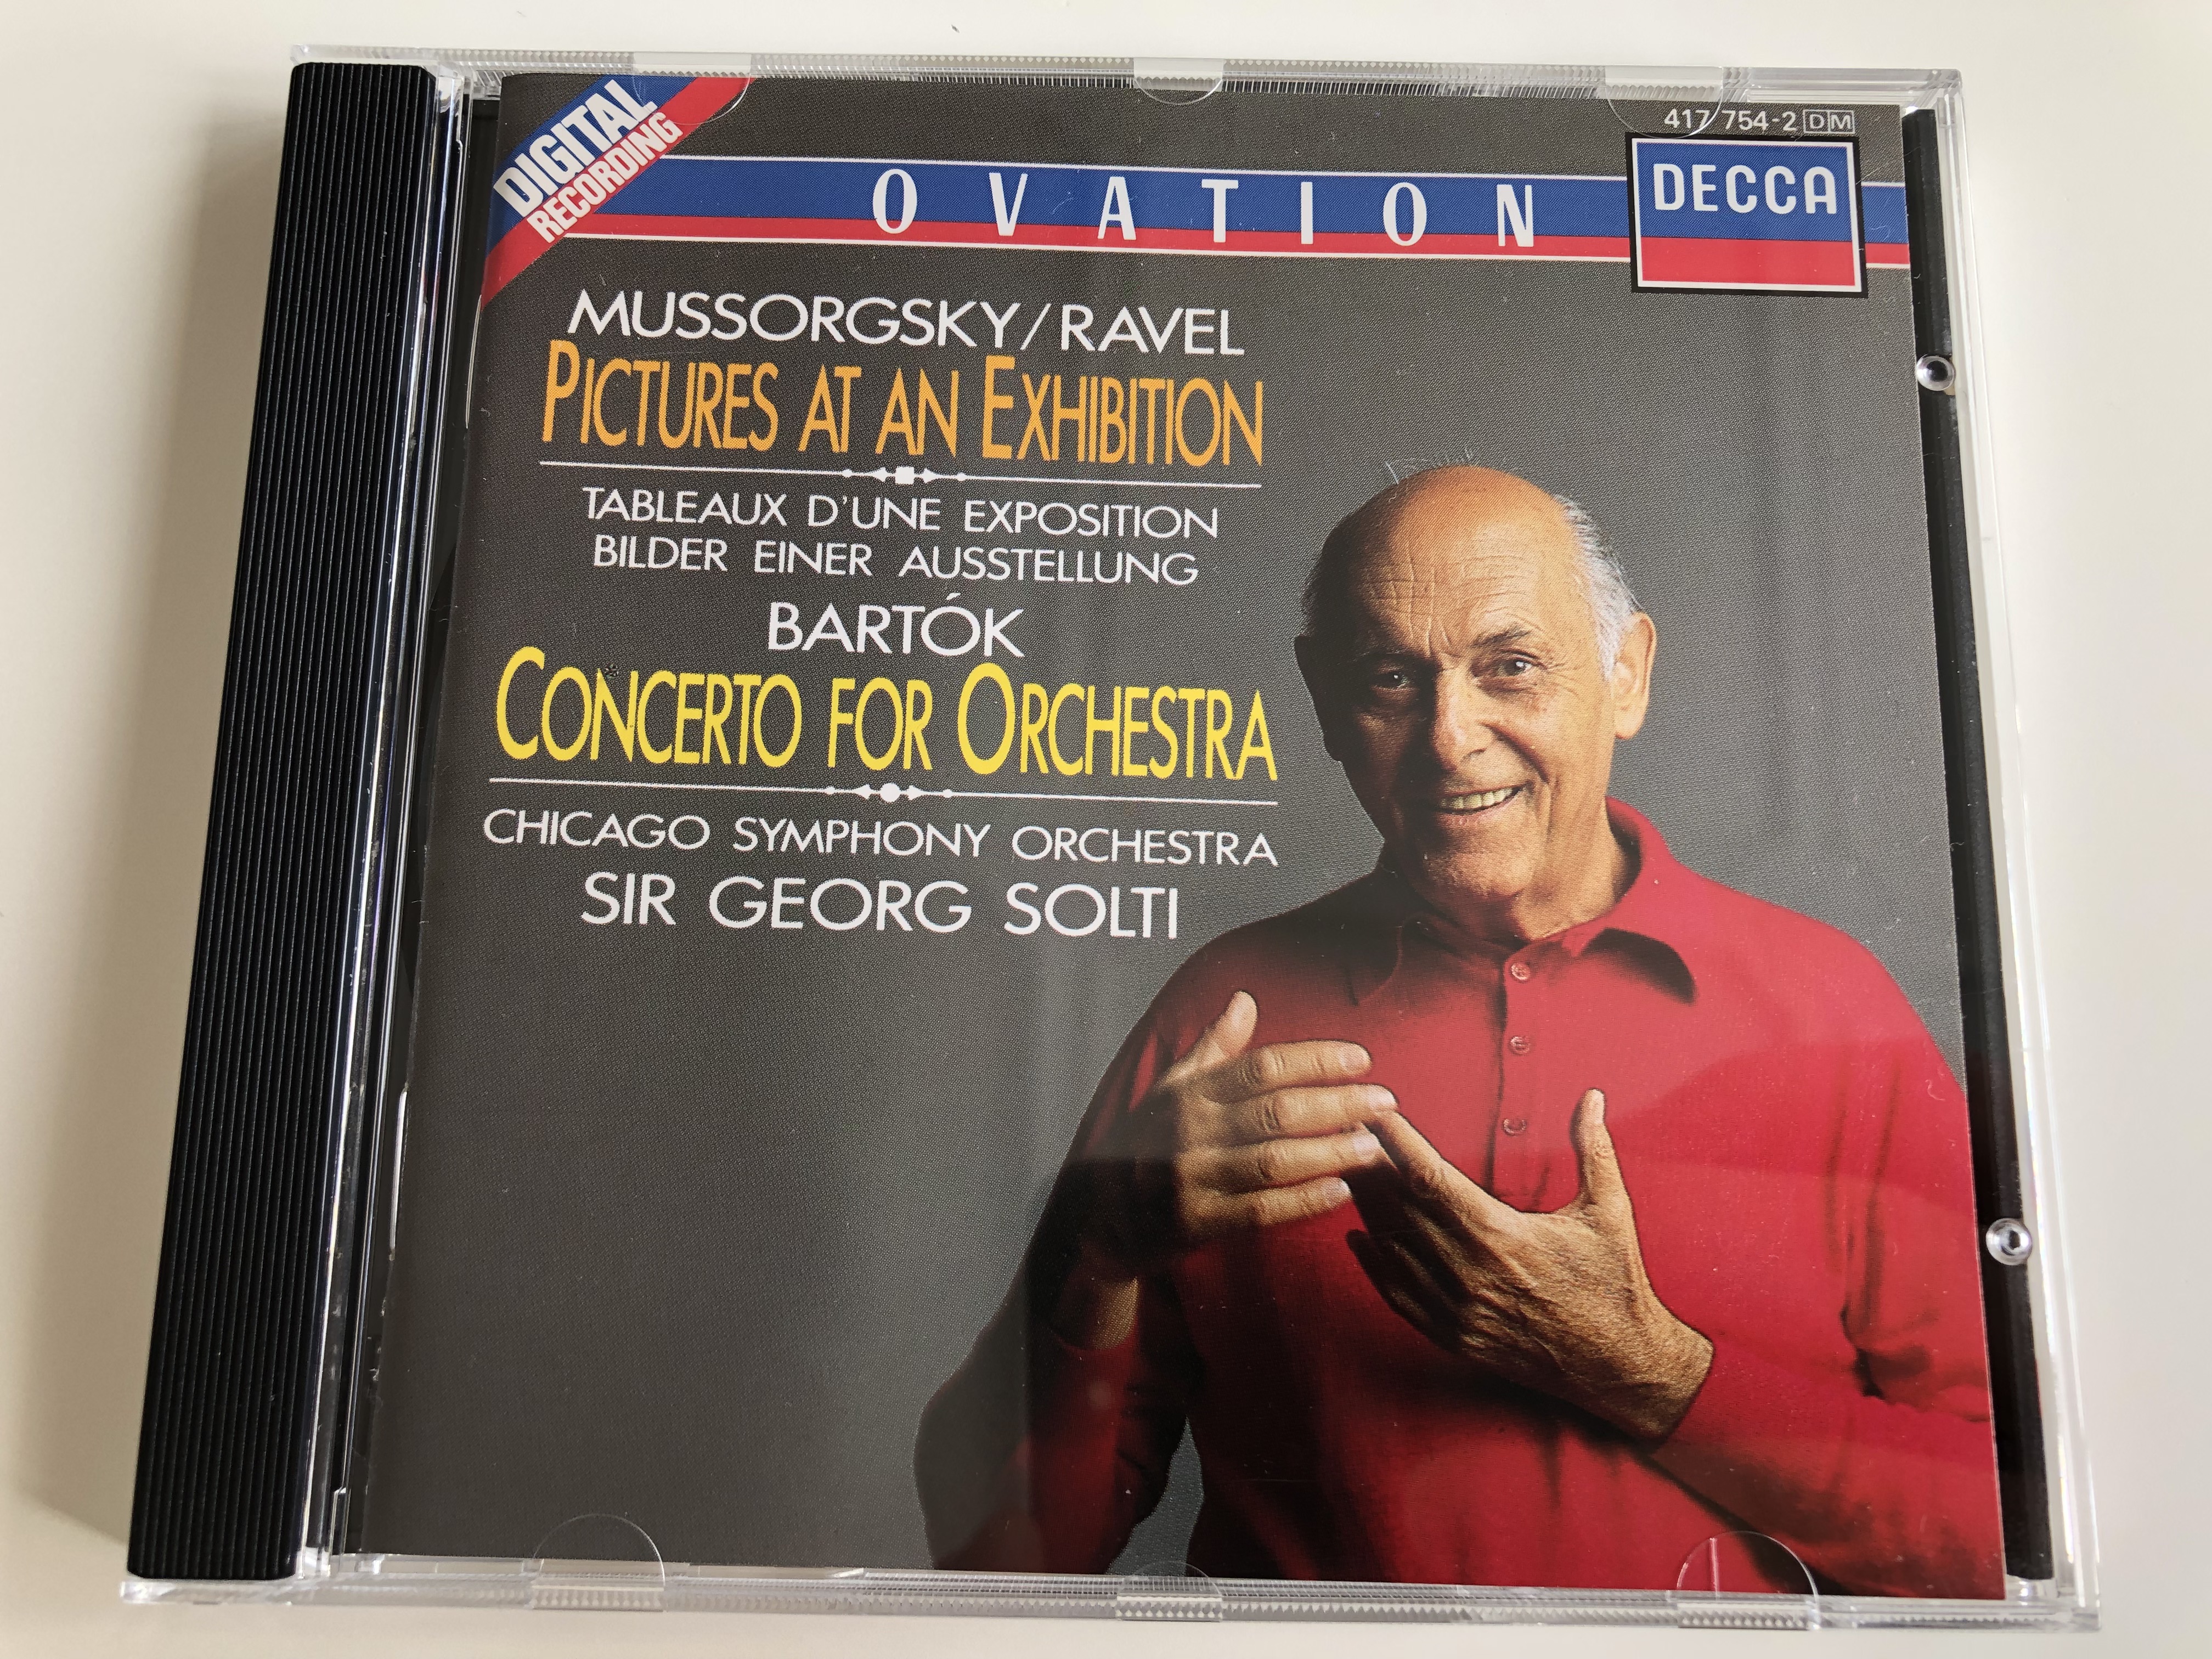 mussorgsky-ravel-pictures-at-an-exhibition-bart-k-concerto-for-orchestra-chicago-symphony-orchestra-sir-georg-solti-decca-audio-cd-1988-stereo-417-754-2-1-.jpg